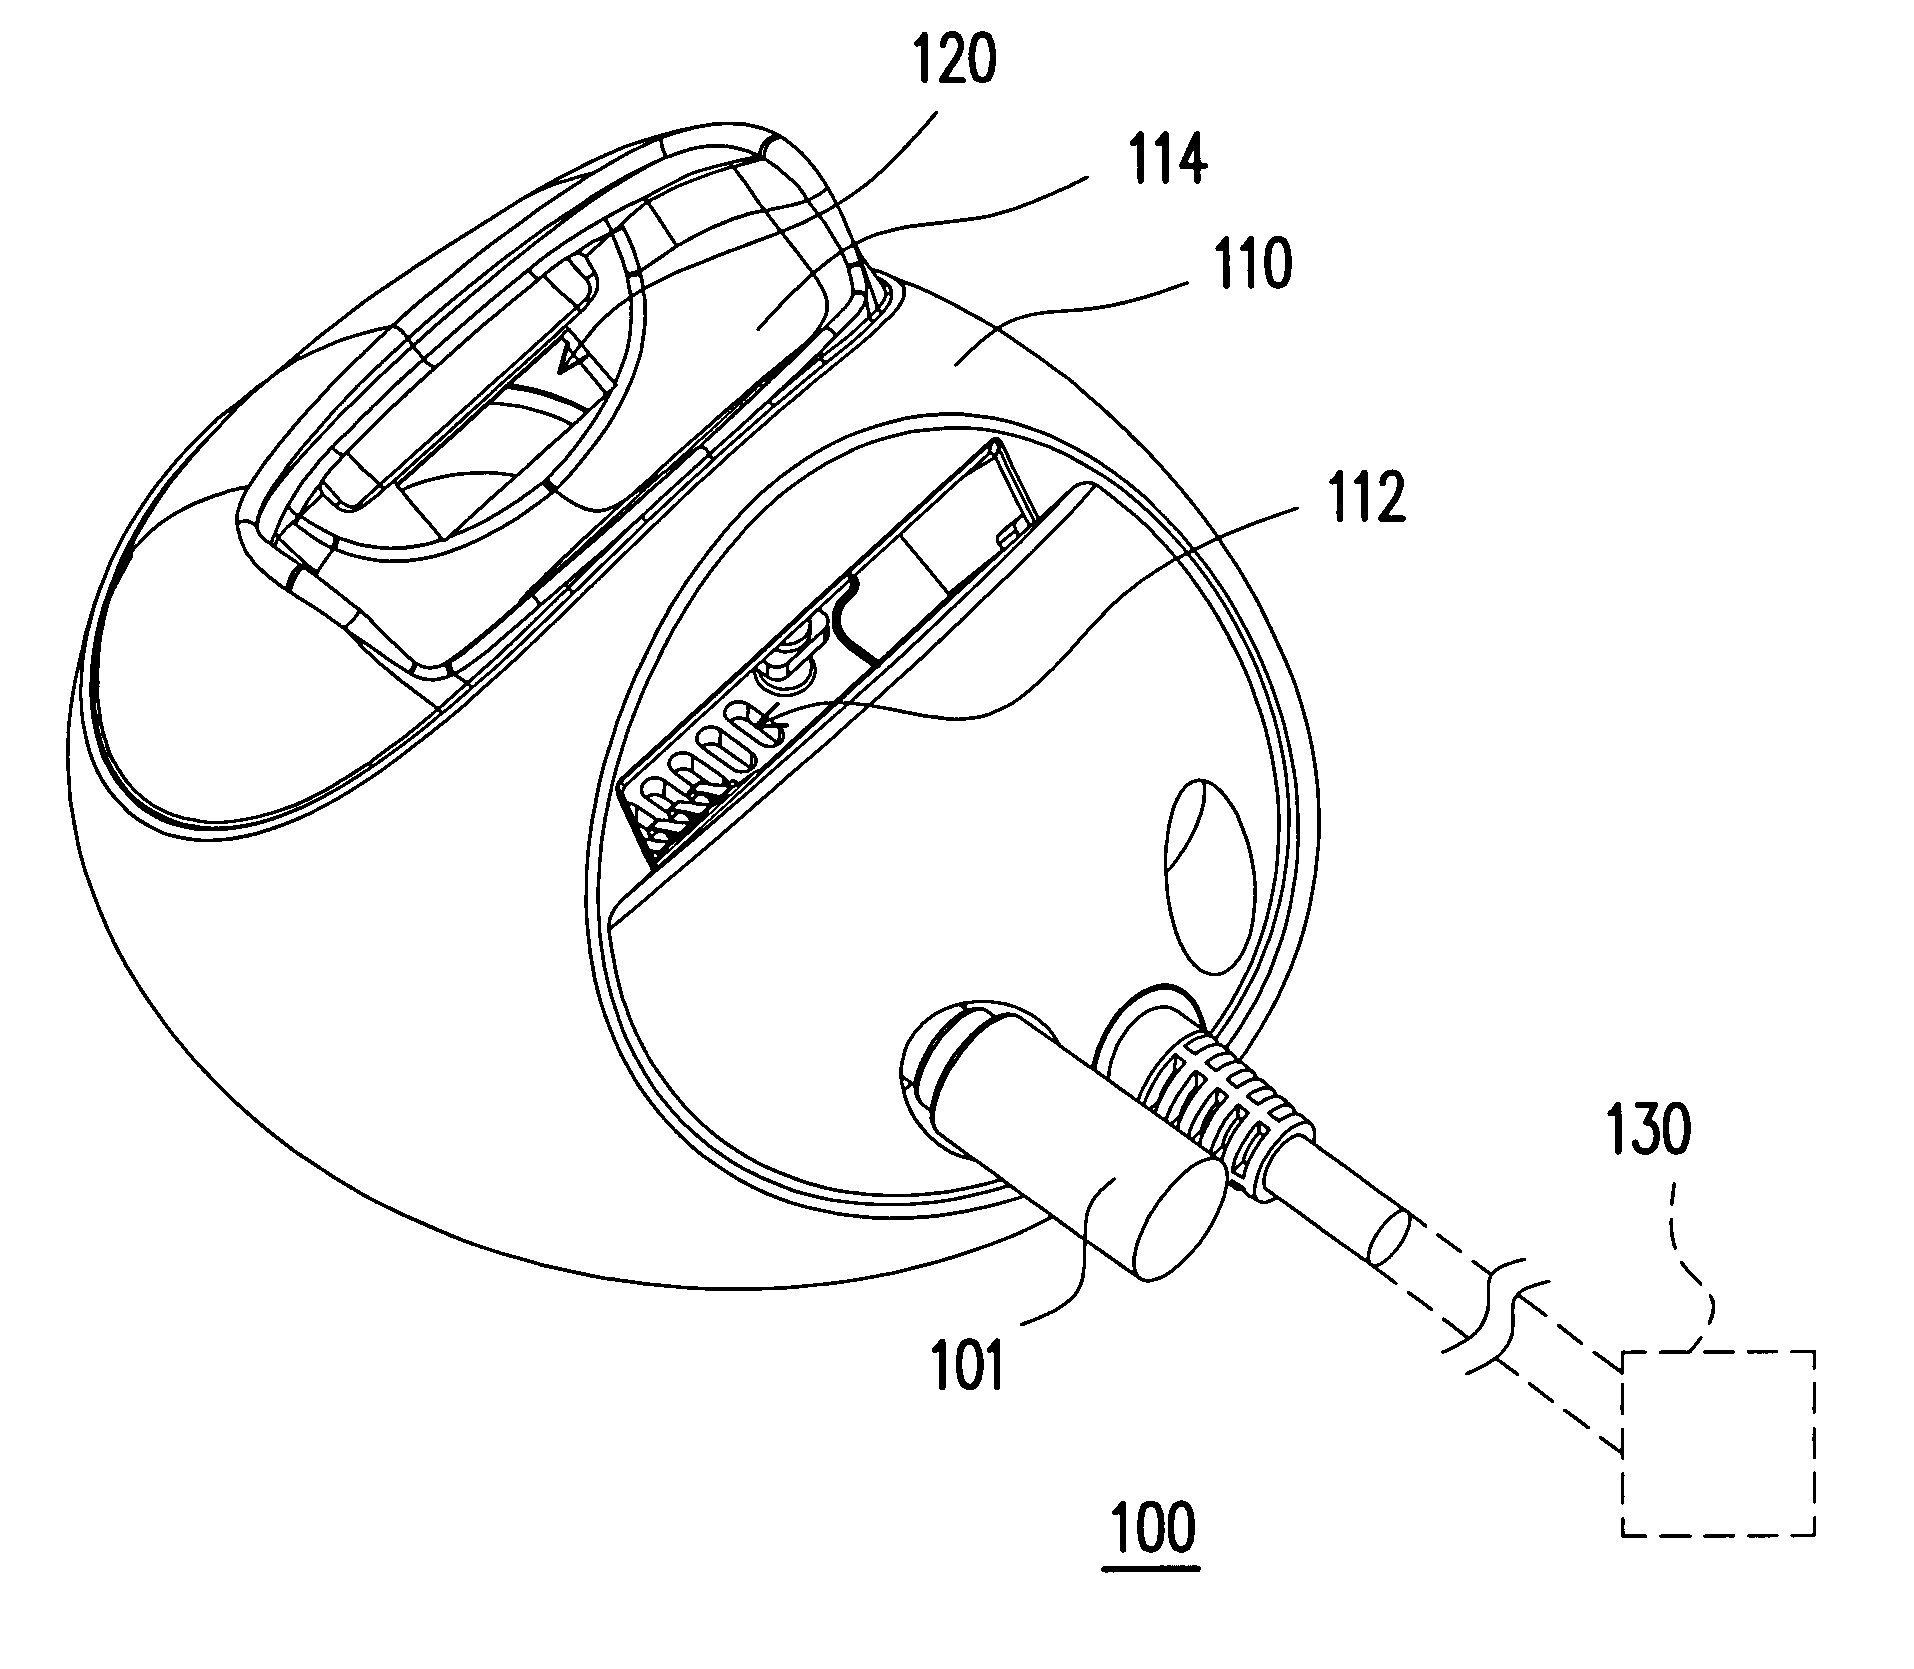 Handheld electronic device cradle with enhanced heat-dissipating capability